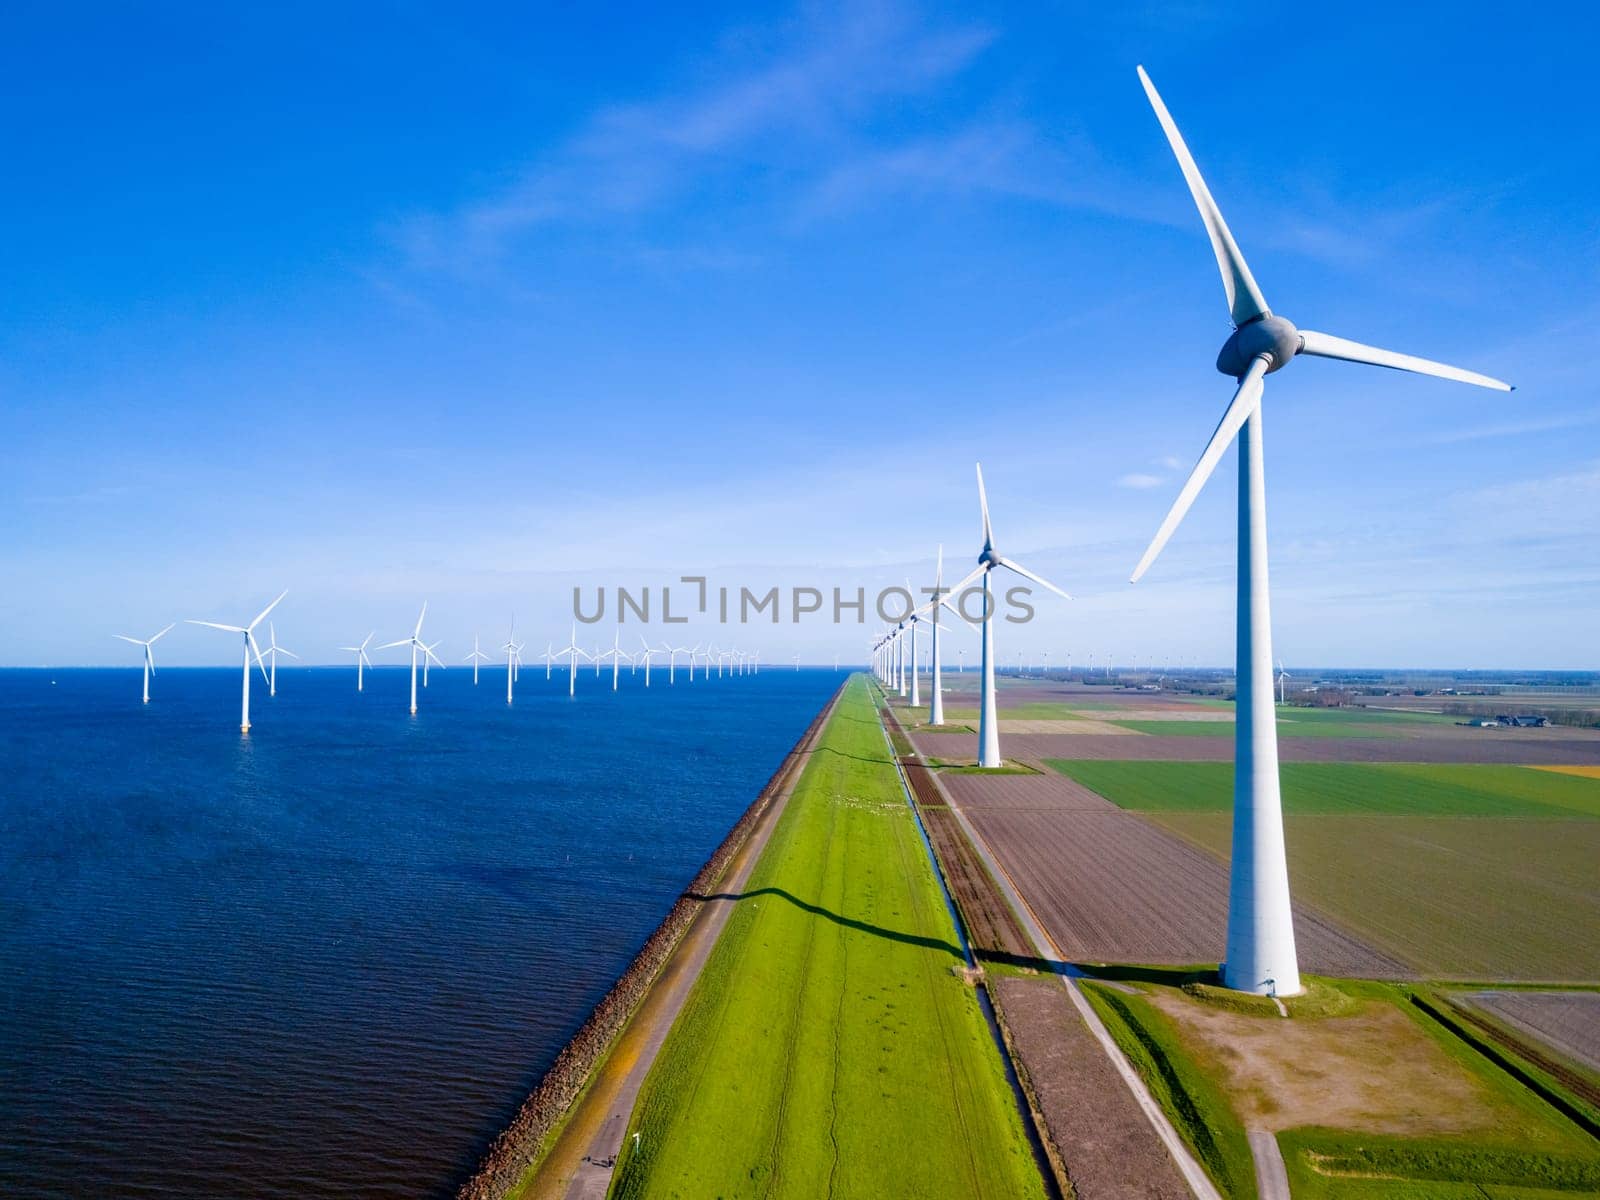 A row of elegant wind turbines stand tall by a vast body of water in the Netherlands Flevoland, reflecting the harmony between nature and renewable energy.